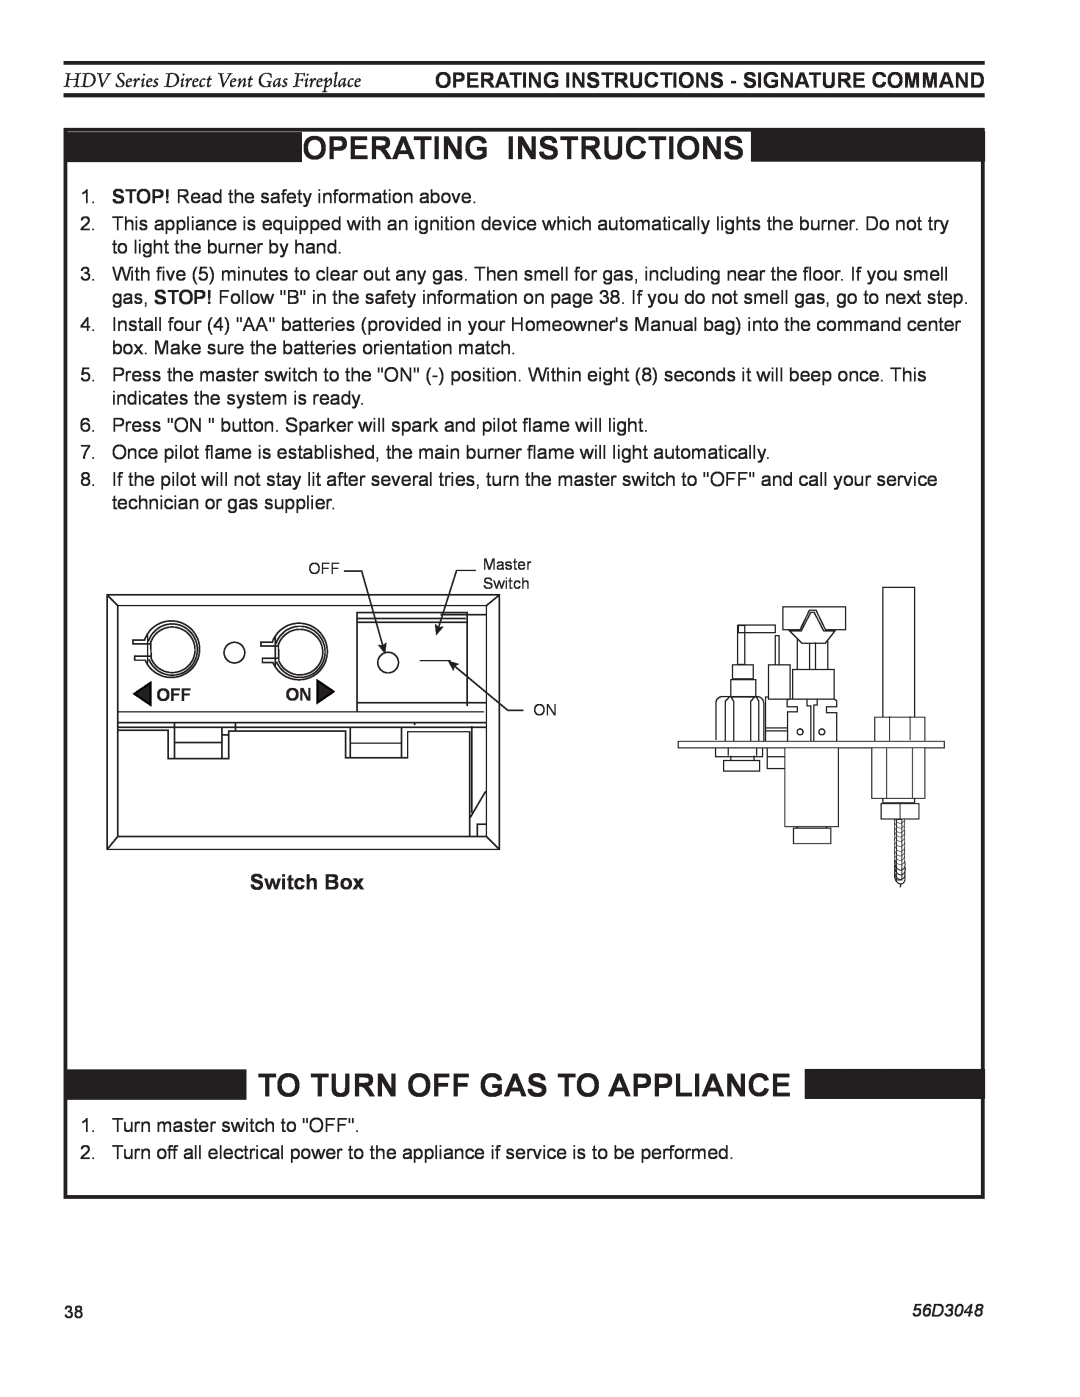 Monessen Hearth HDV500NV/PV manual OPERATing INSTRUCTIONS, To Turn Off Gas To Appliance, Switch Box 